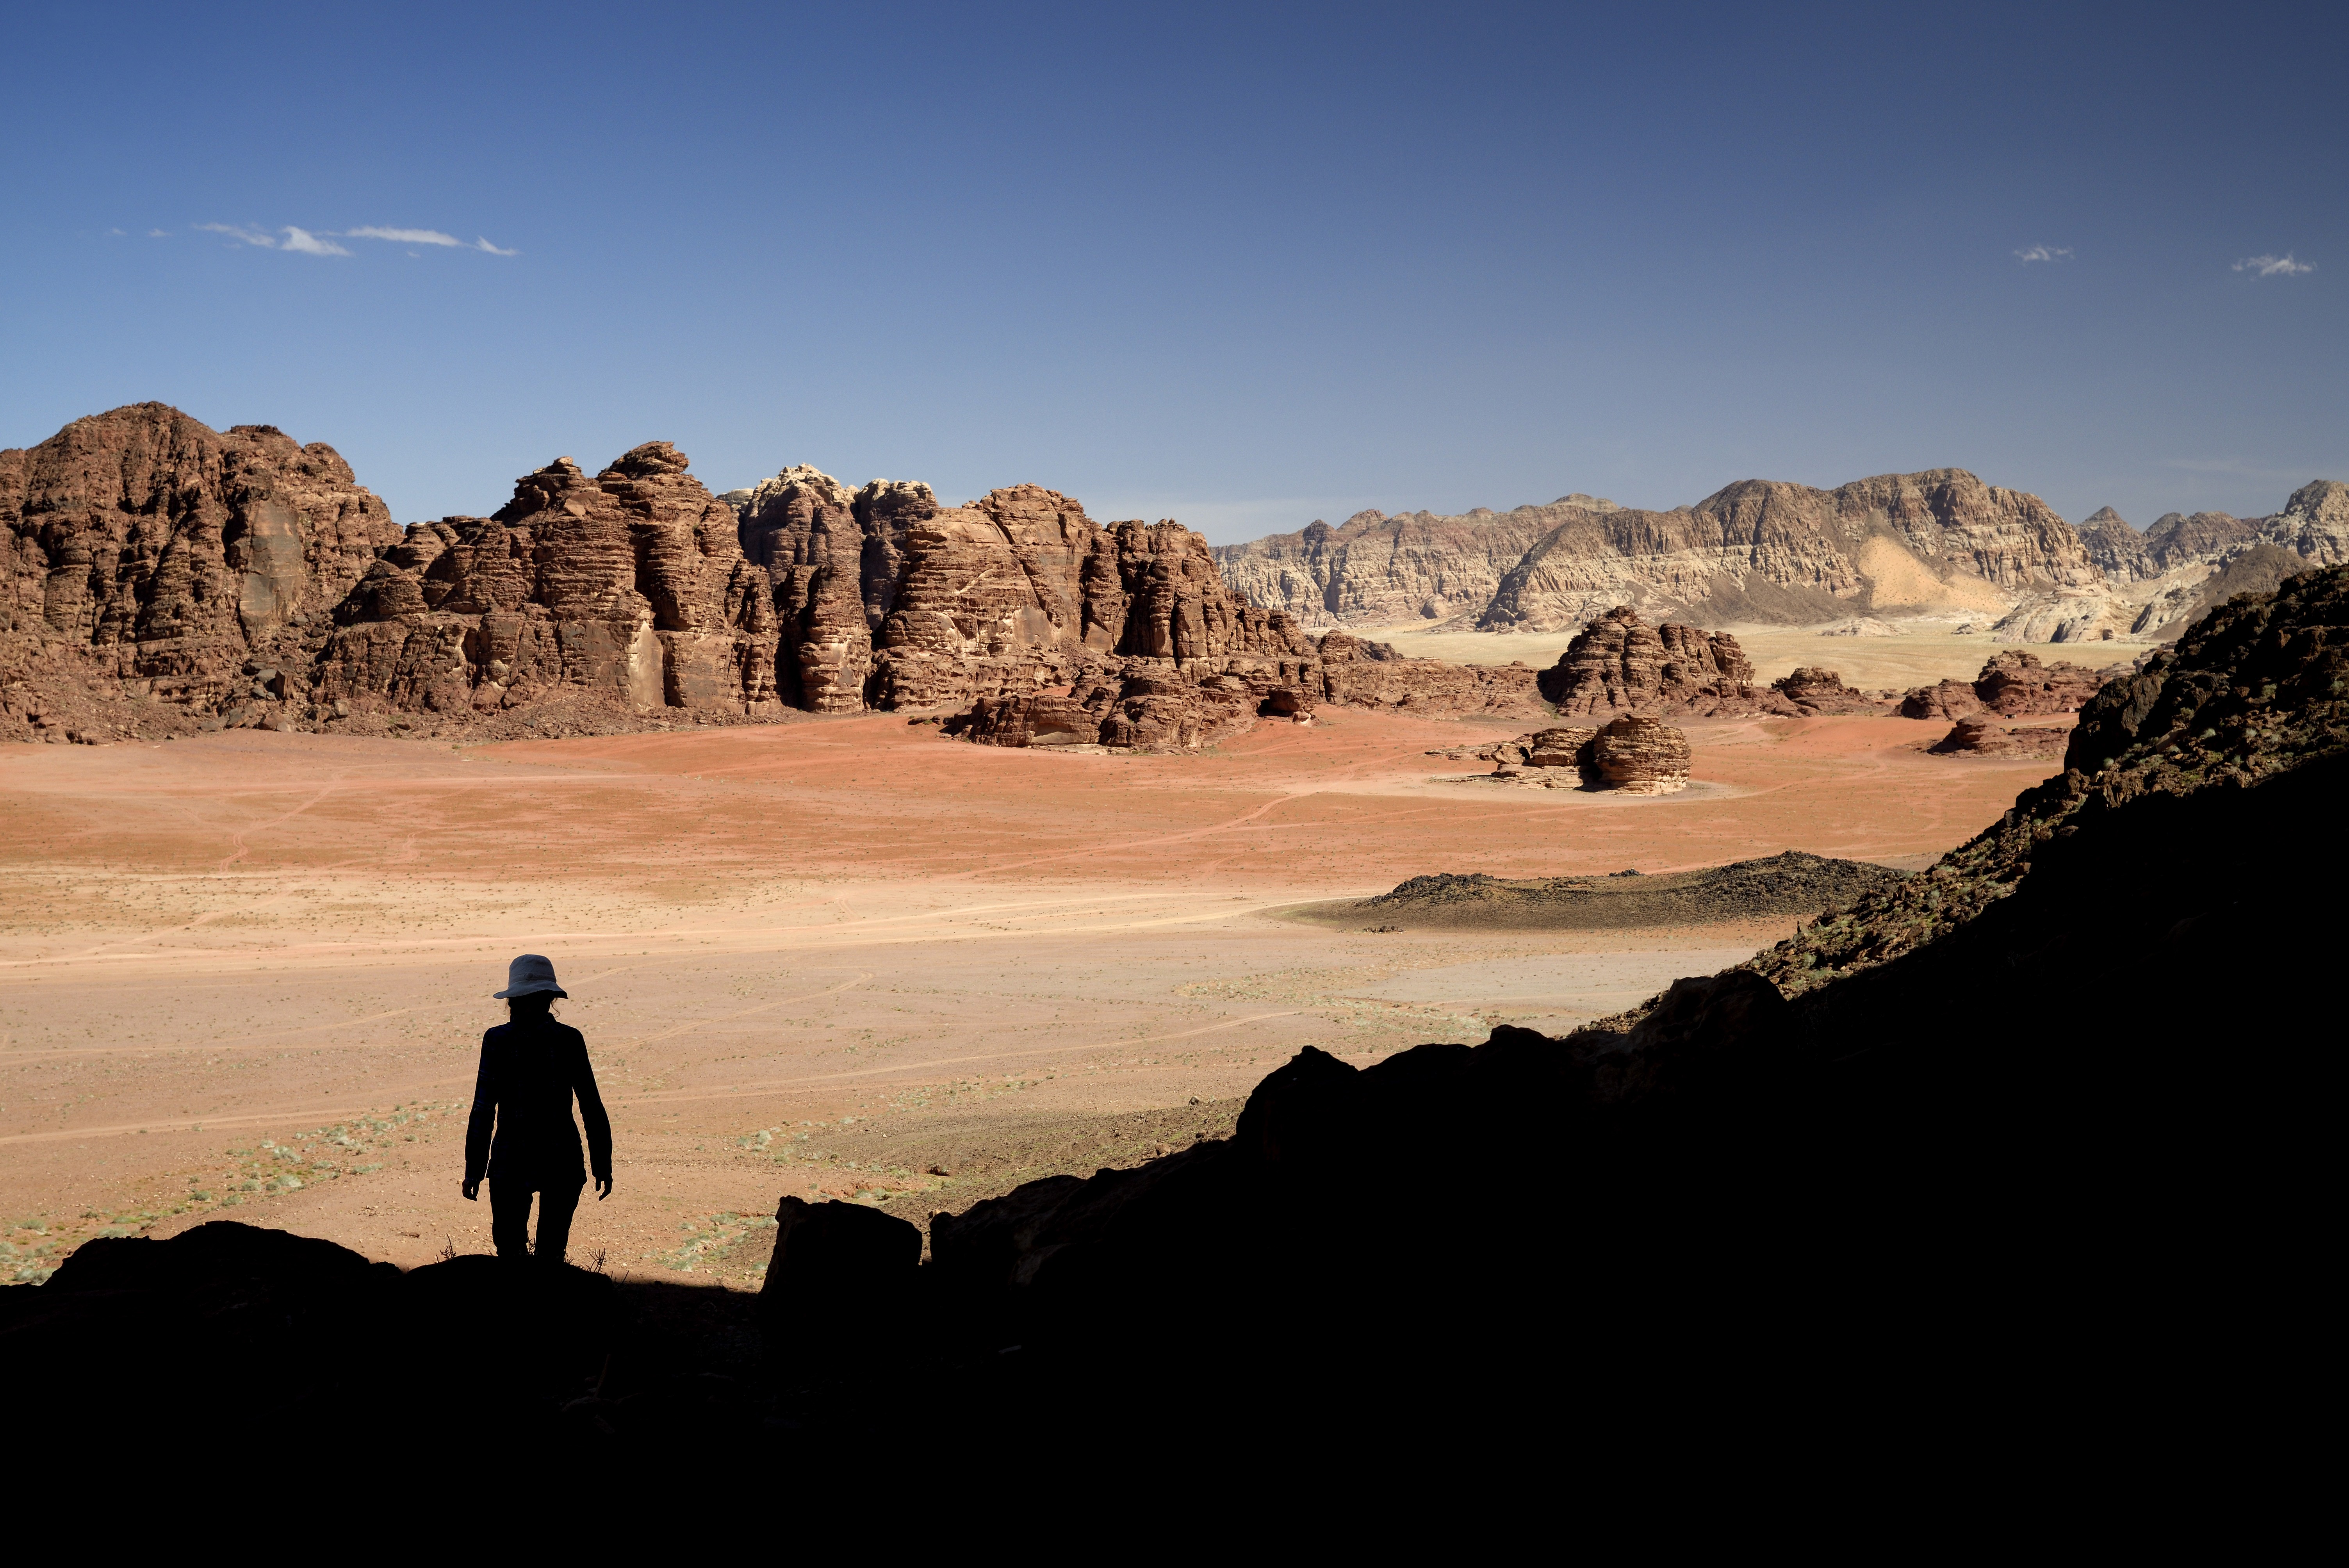 Steep cliffs tower over the red sand desert of Wadi Rum, a sandstone valley in southern Jordan. Photo: Photononstop